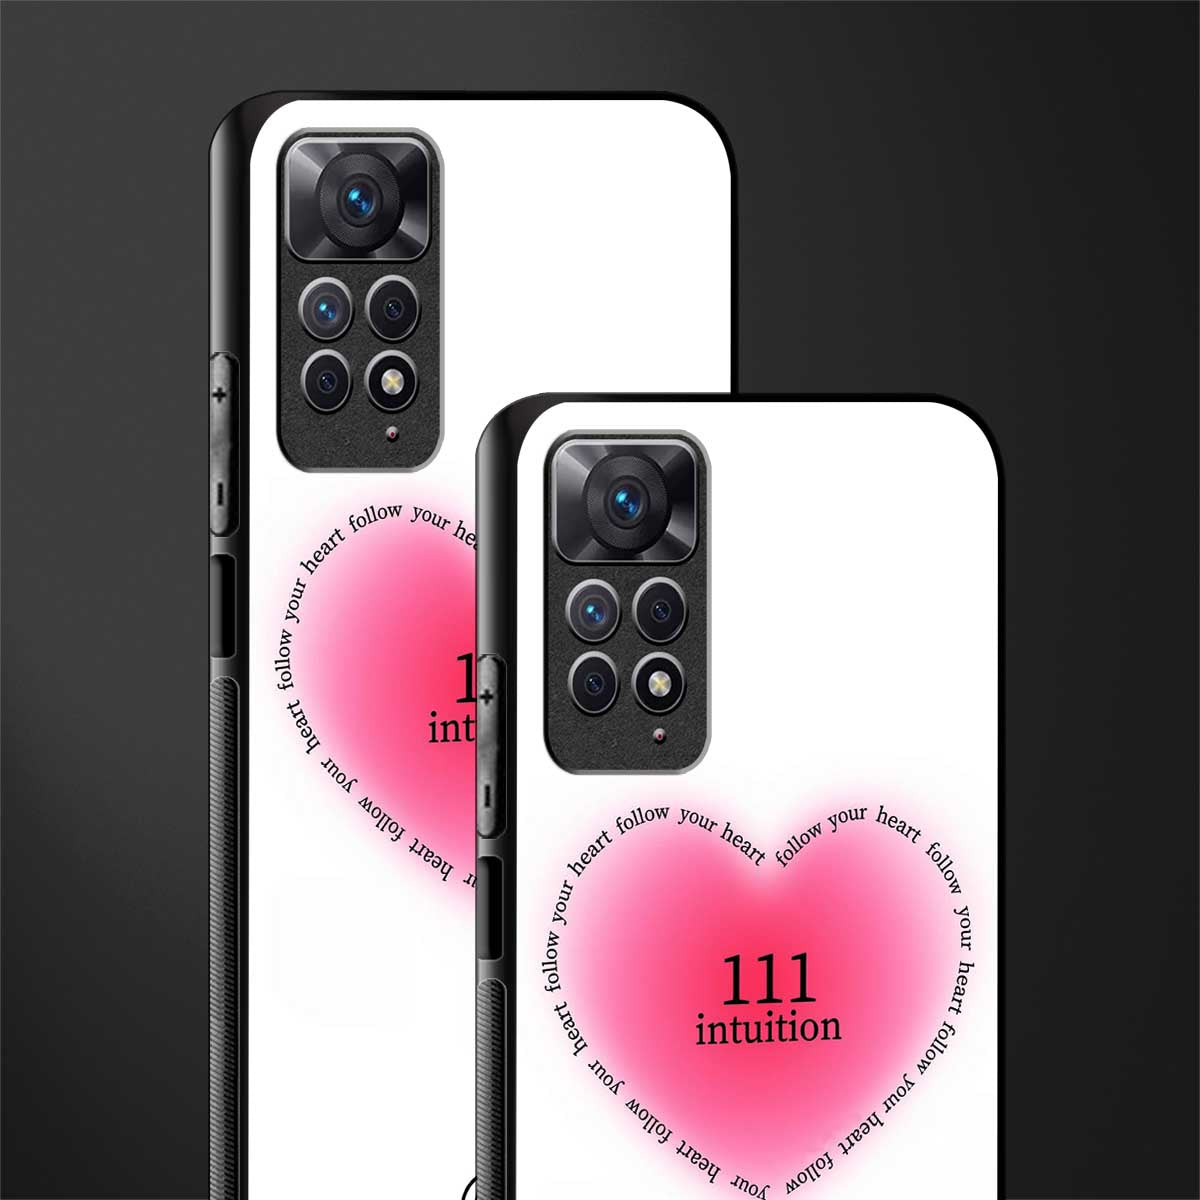 111 intuition back phone cover | glass case for redmi note 11 pro plus 4g/5g